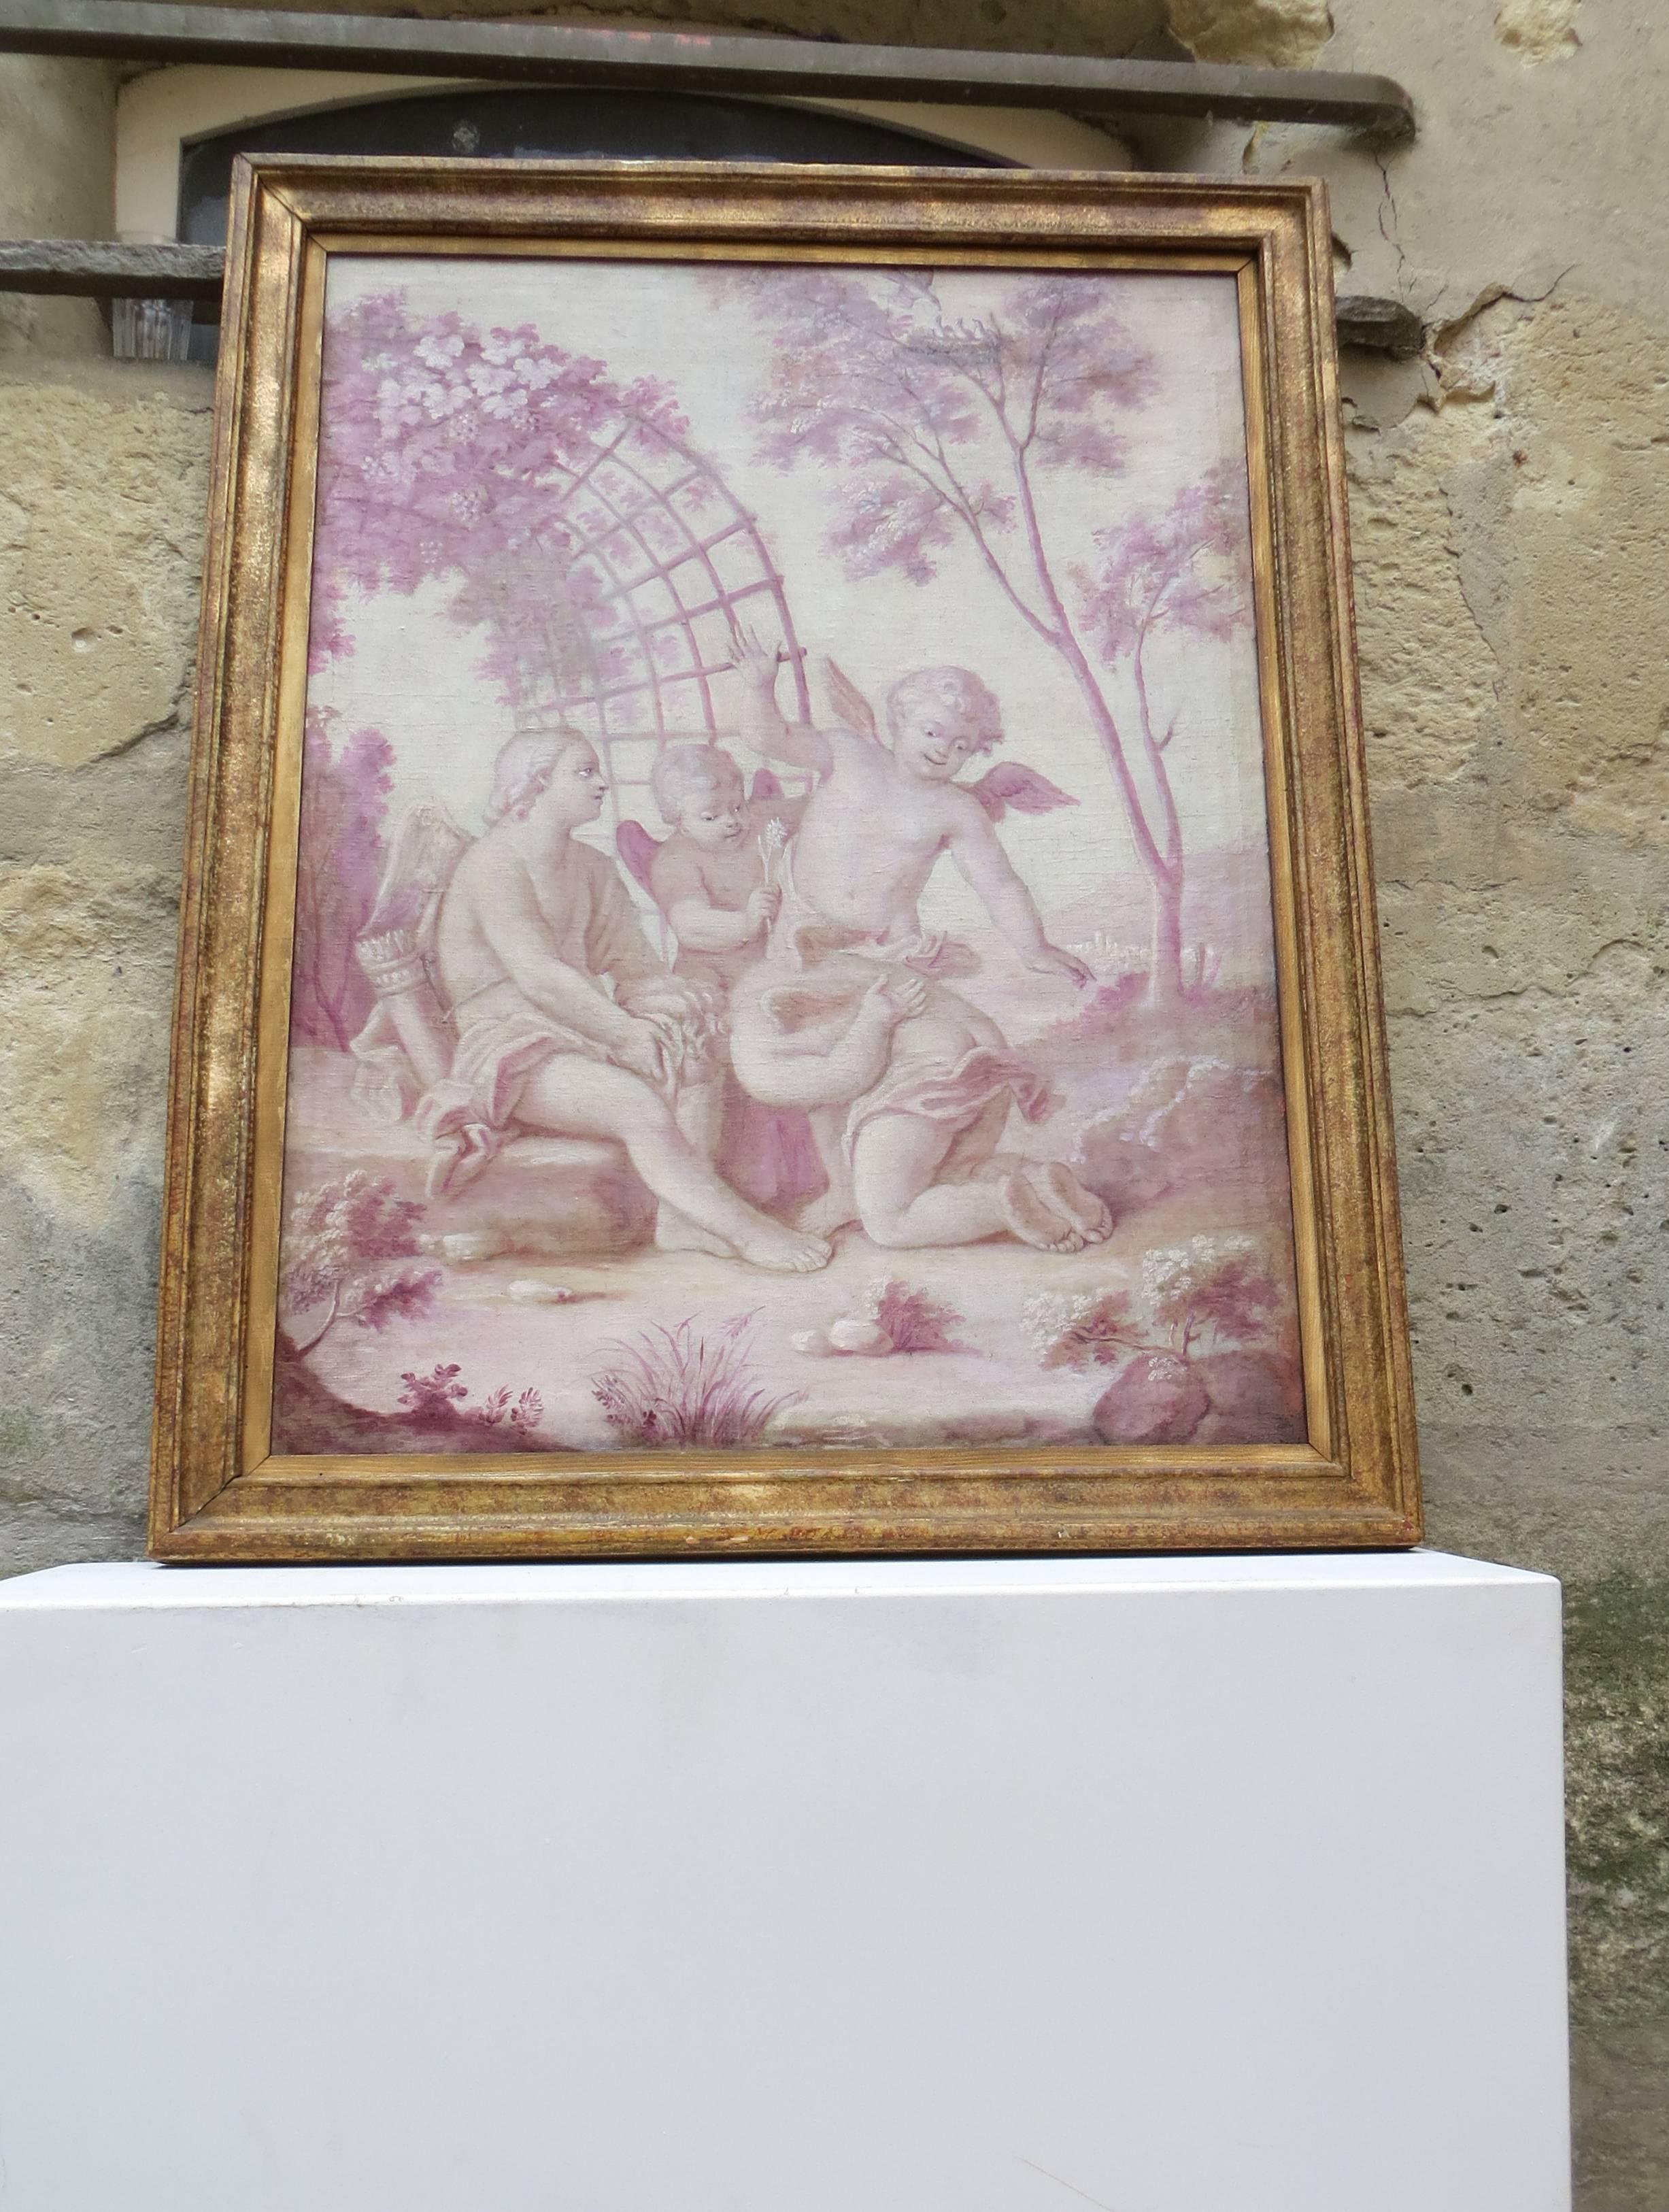 Framed oil on canvas depicting children. Pink grisaille of cherubs playing in a park. Subject often found over doors or piers in the manner of the 18th century.